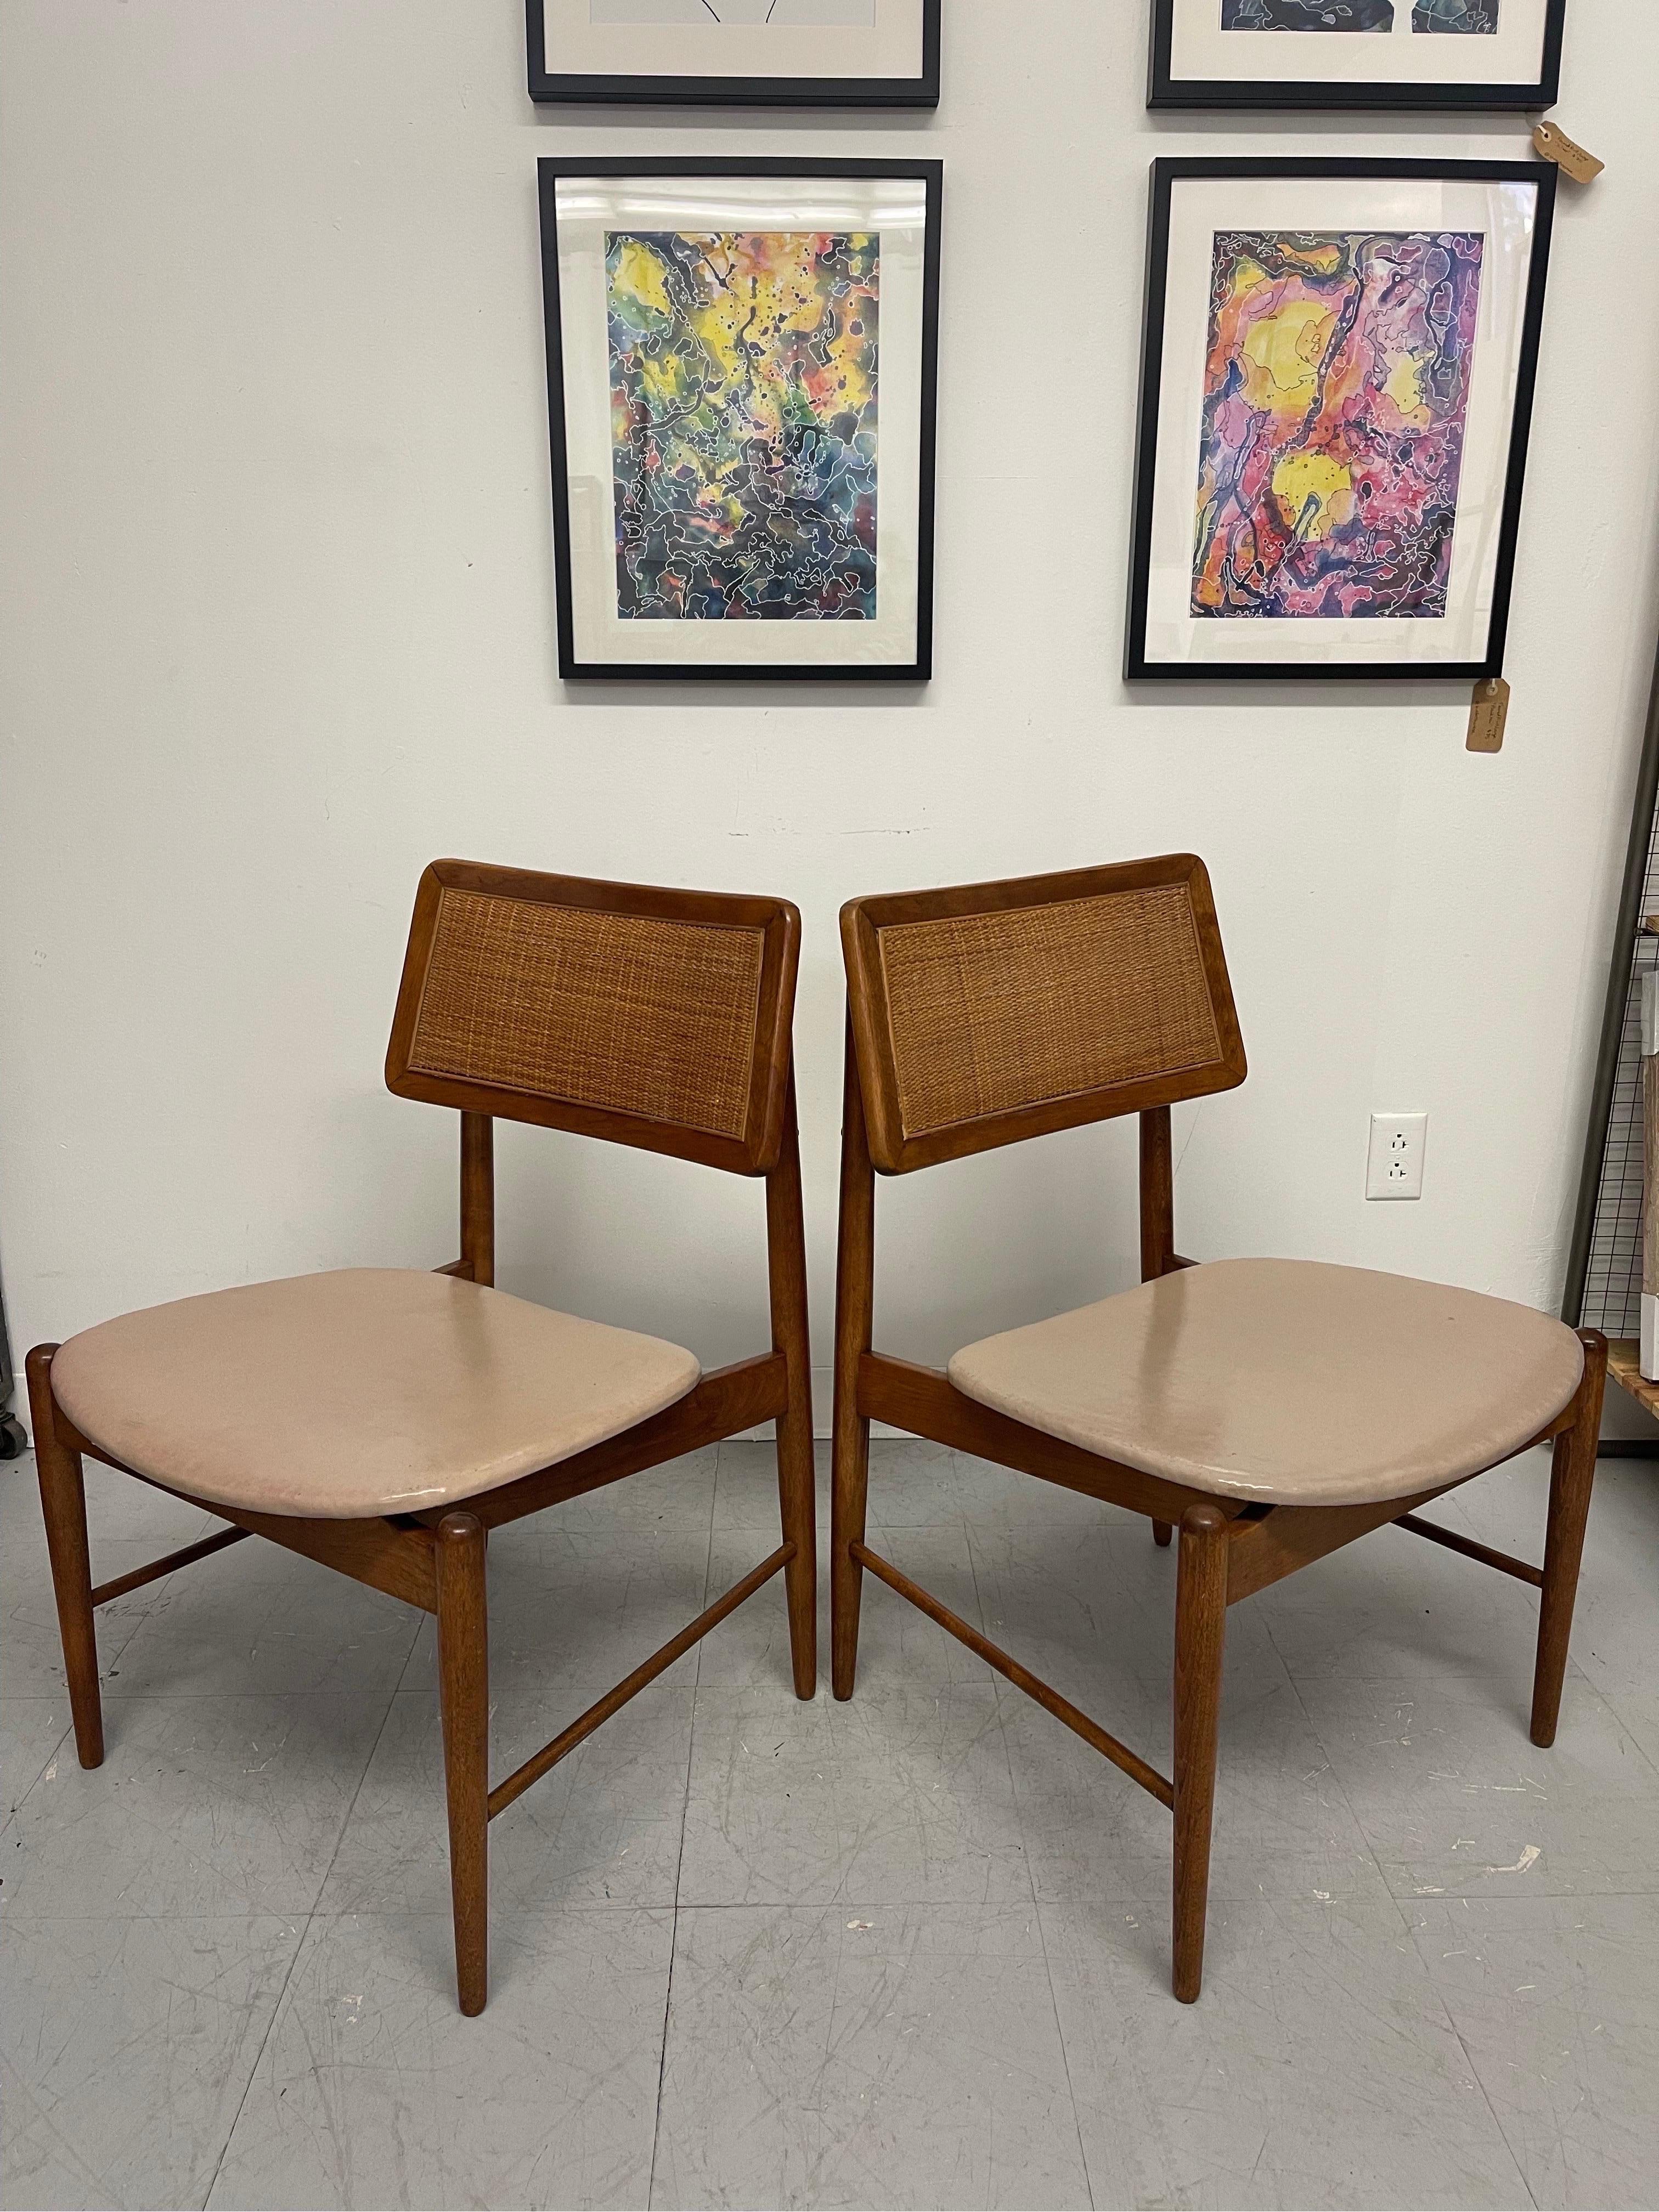 Vintage Chair Set with Walnut Toned Wood, Rattan Accent , and Beige Toned Seating. In the Style of Arne Vodder. MCM Lines Throughout. Circa 1960s - 1970s. Vintage Condition Consistent with Age as Pictured.

Dimensions. 22 W ; 20 D ; 32 H